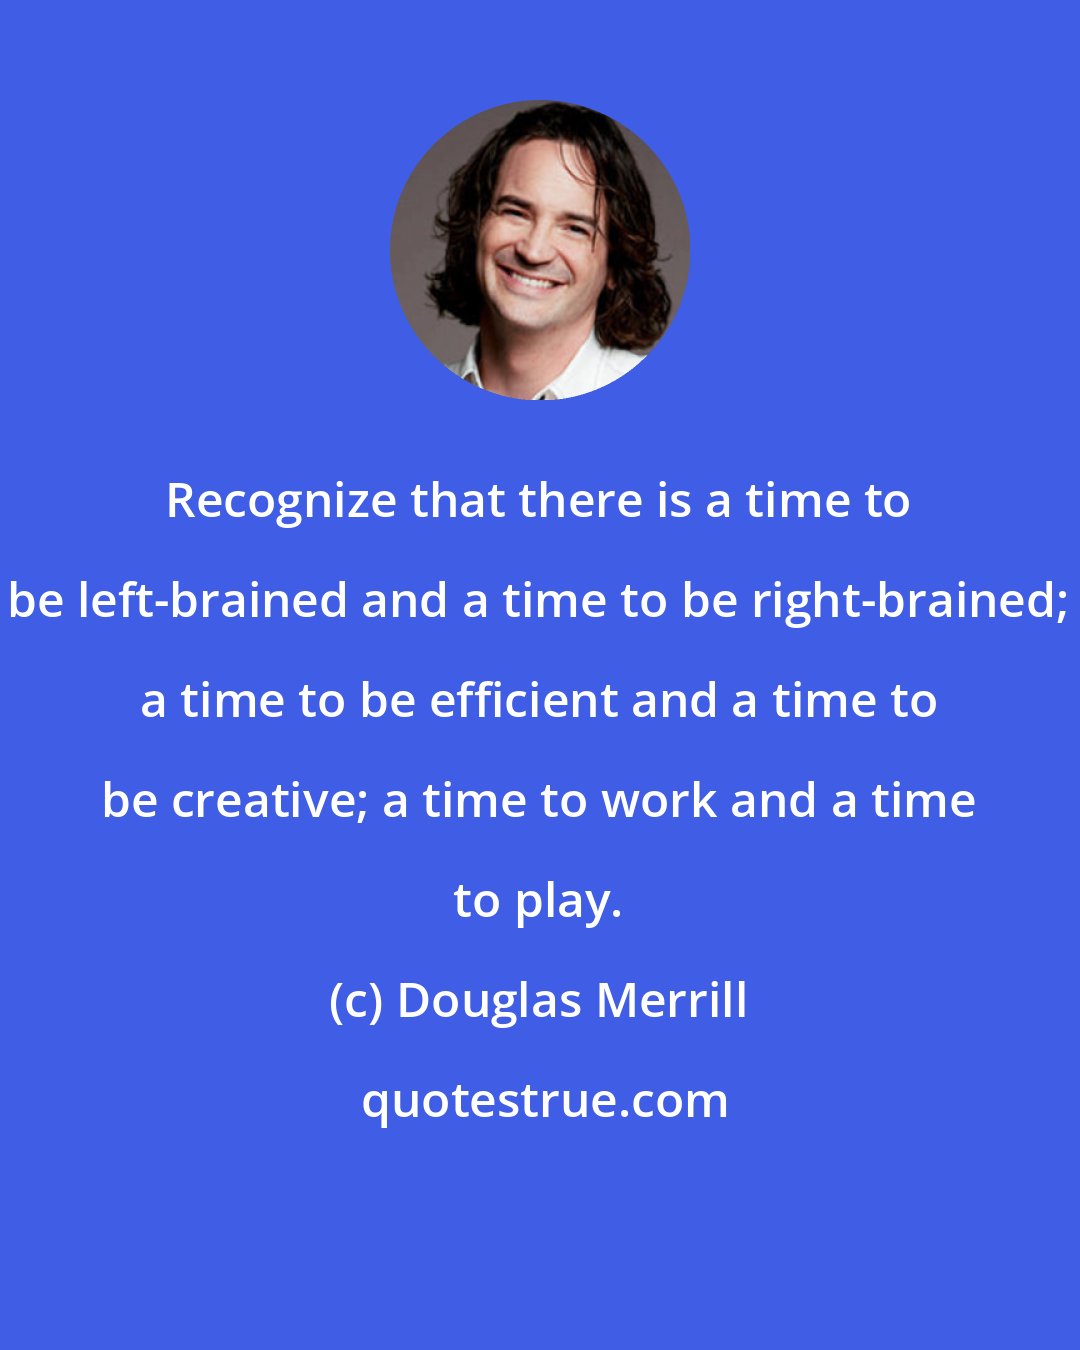 Douglas Merrill: Recognize that there is a time to be left-brained and a time to be right-brained; a time to be efficient and a time to be creative; a time to work and a time to play.